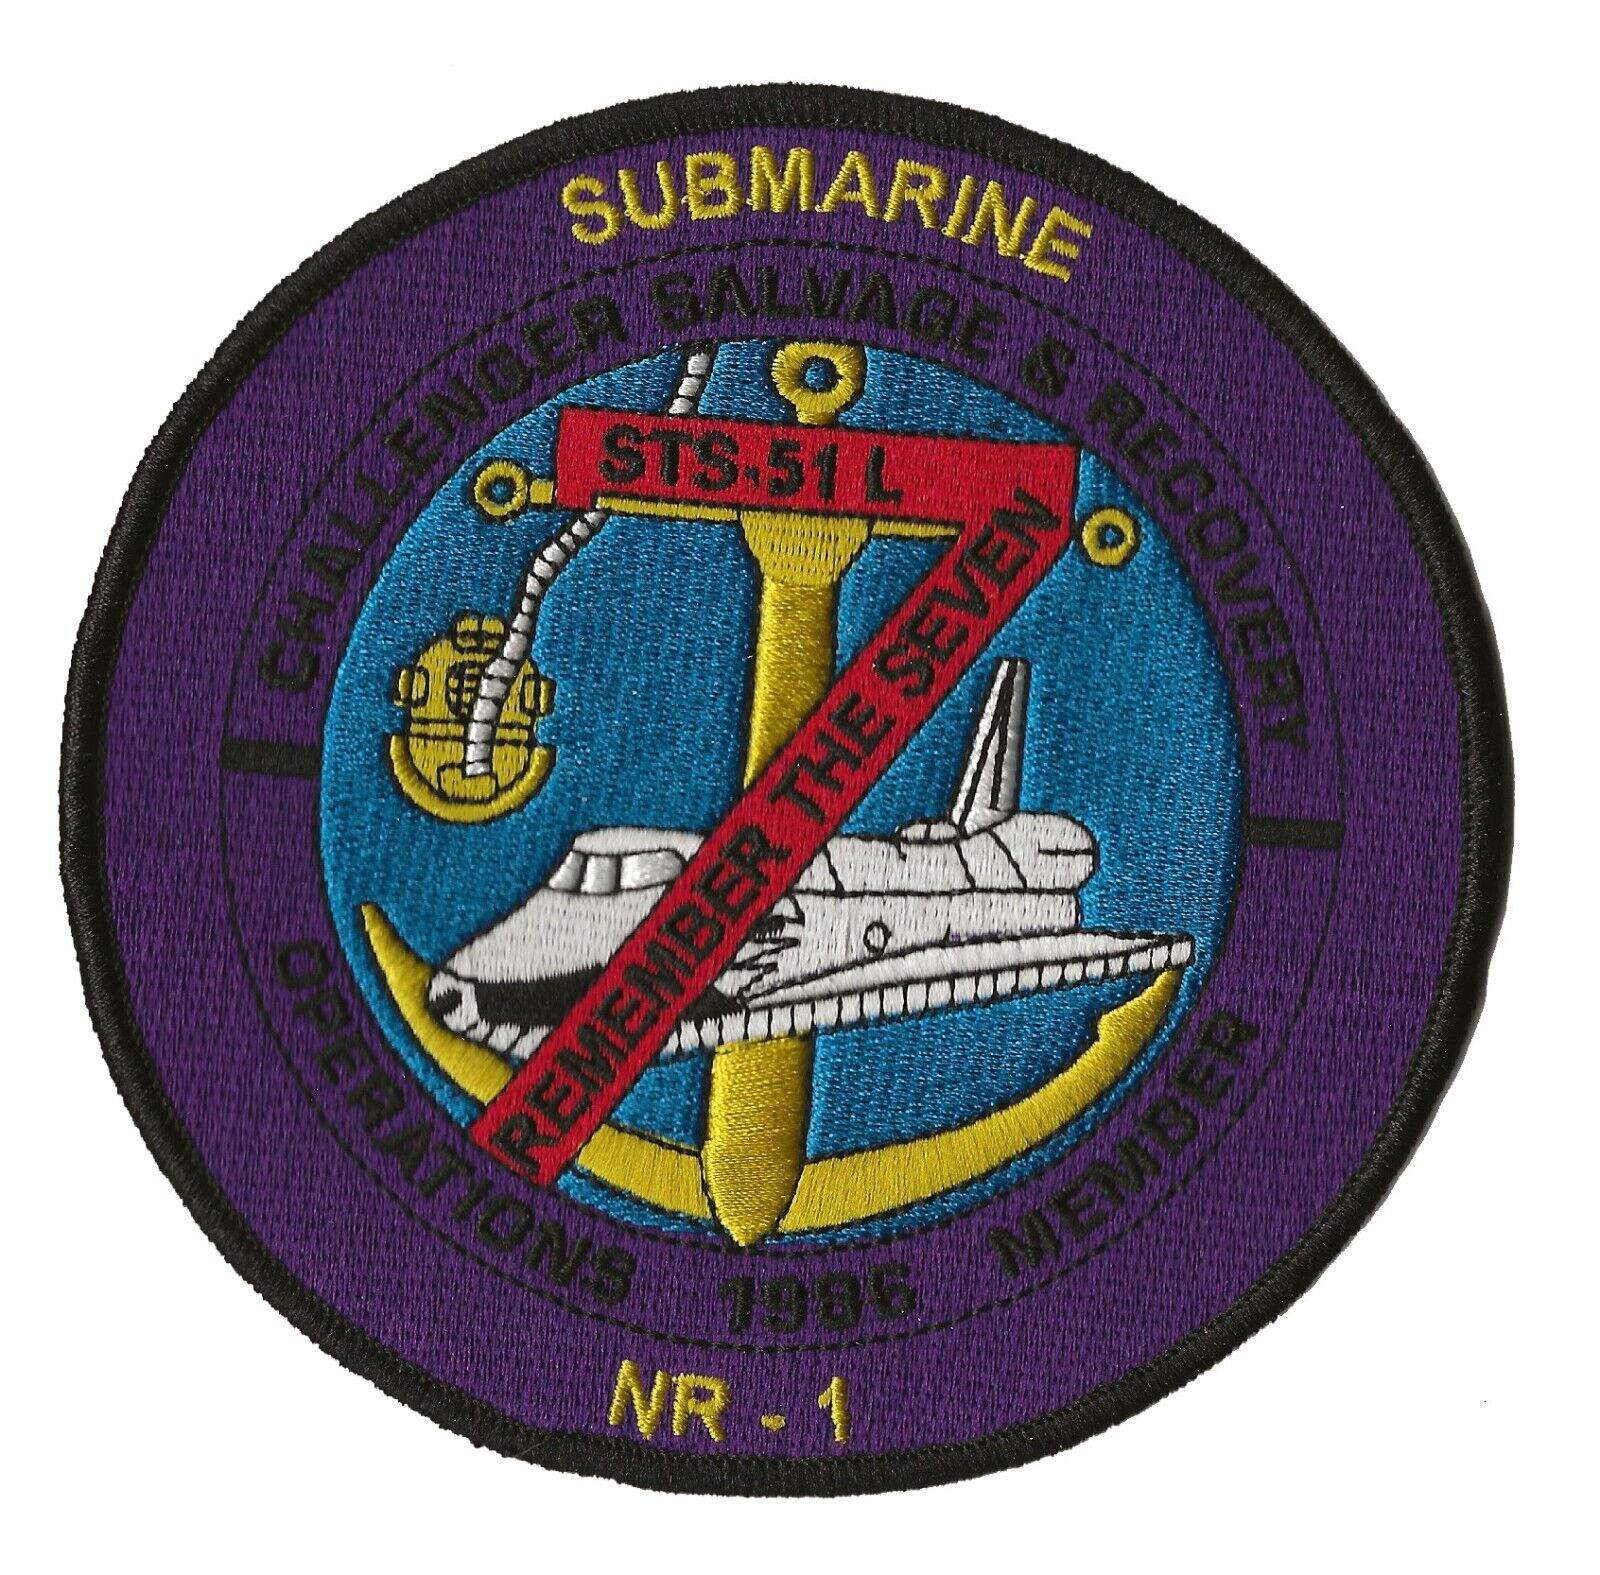 US Navy Submarine NR-1 NASA space shuttle Challenger recovery salvage patch